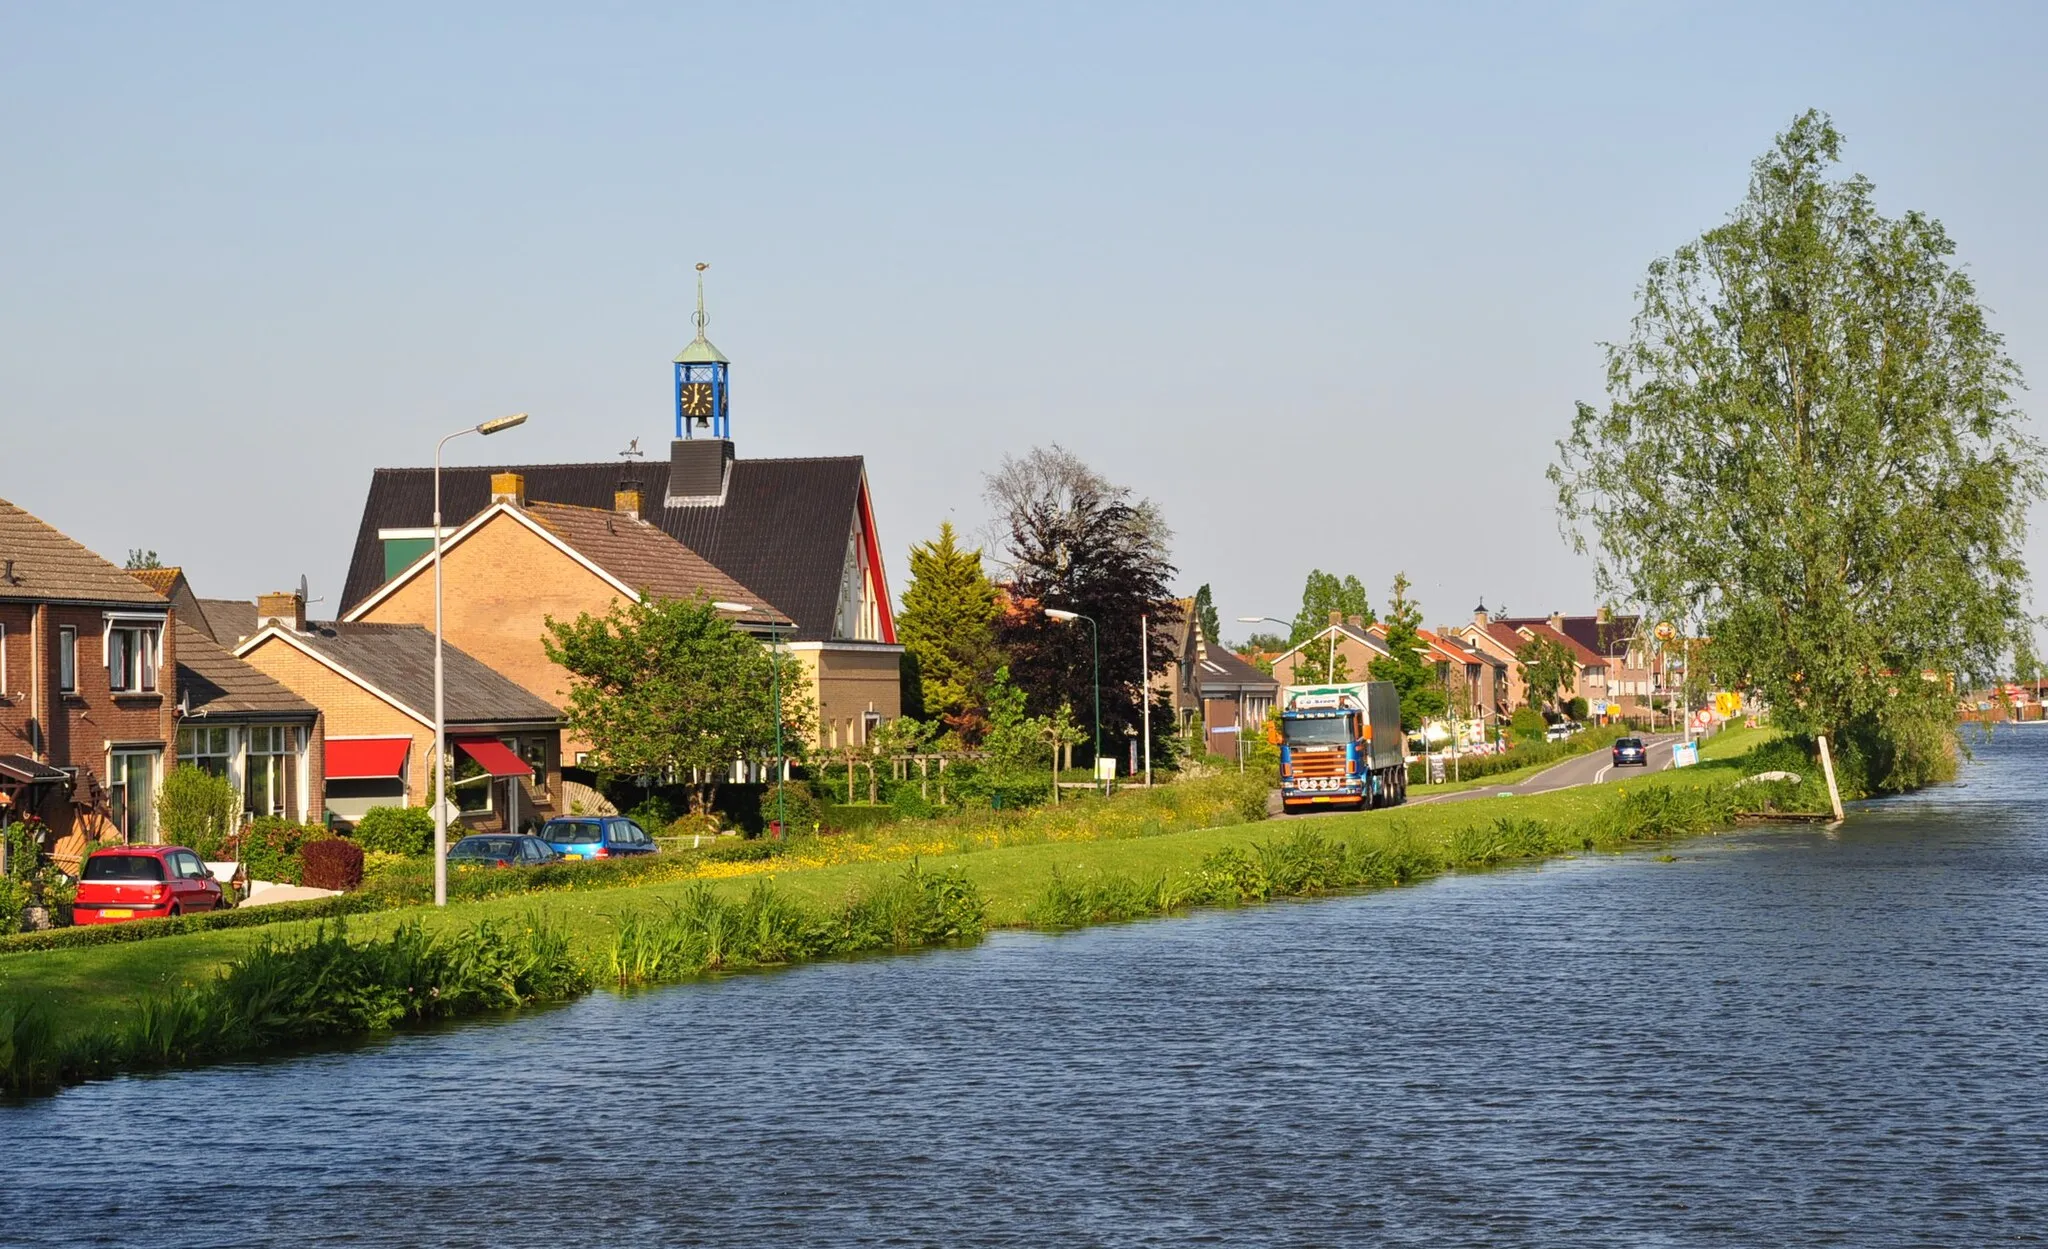 Photo showing: Woerdense Verlaat (a hamlet in the municipality of Nieuwkoop, province South Holland, Netherlands).